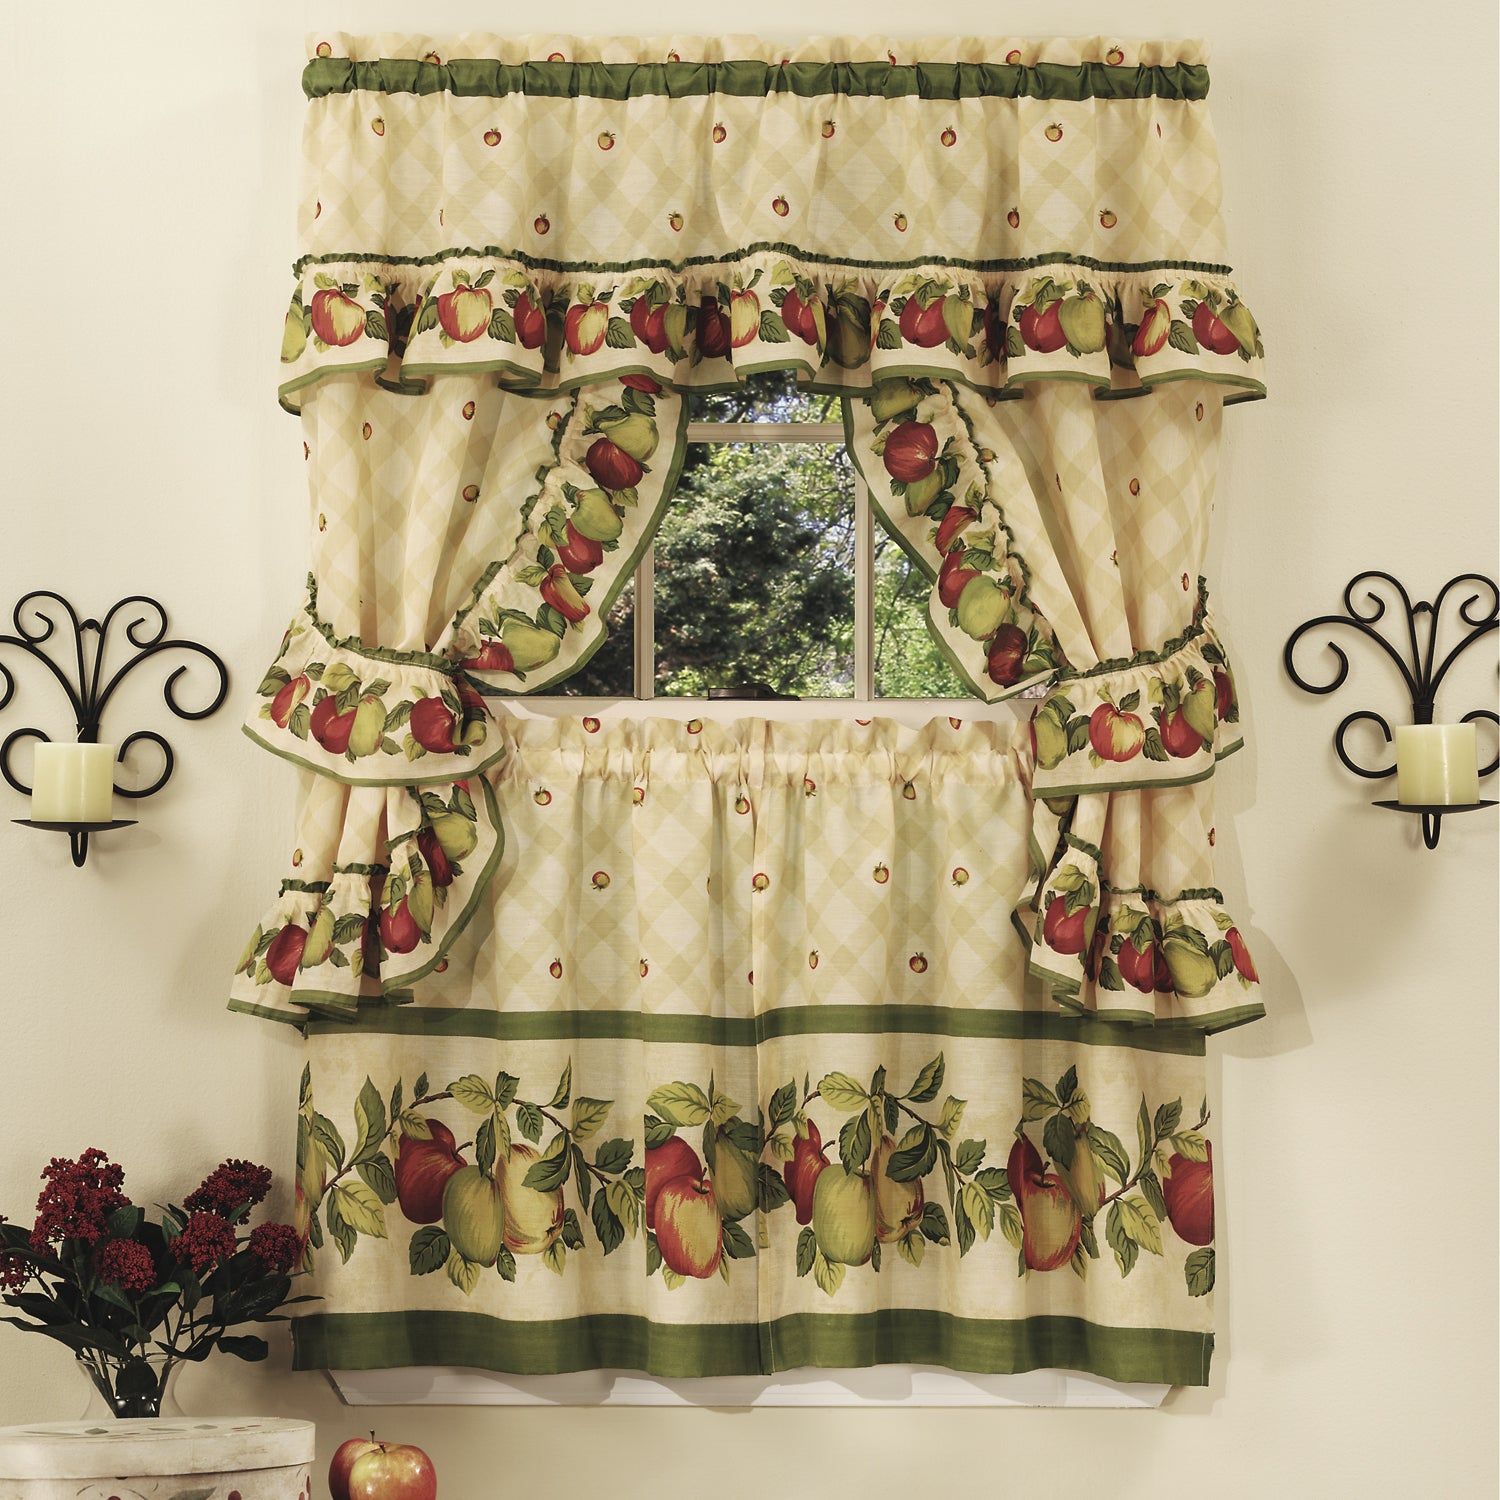 Achim Apple Orchard Printed Kitchen Tier Set In Window Curtains Sets With Colorful Marketplace Vegetable And Sunflower Print (View 14 of 20)